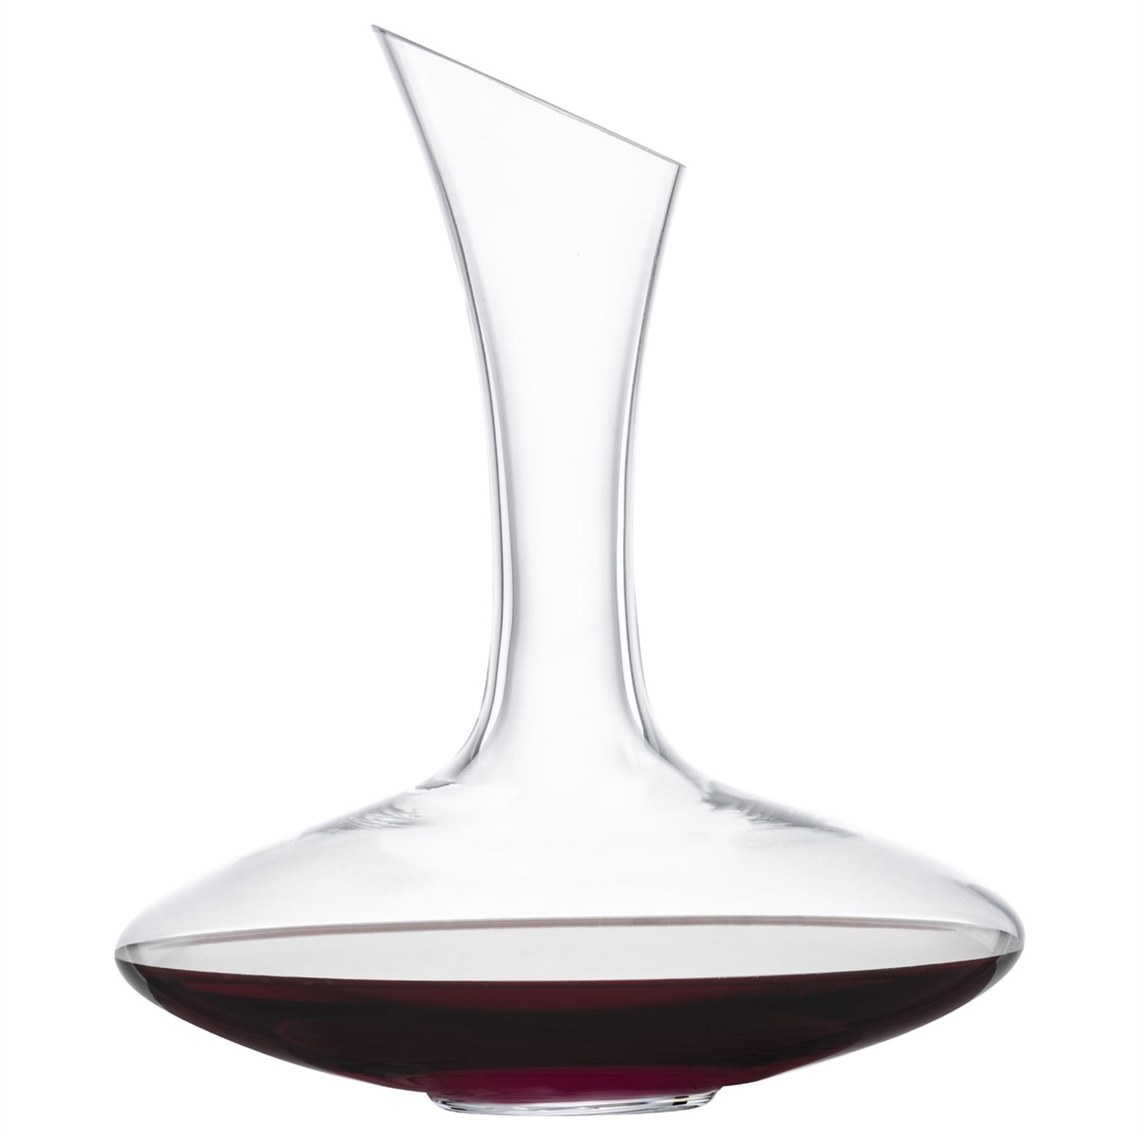 Eisch Glas Crystal Chateau Wine Decanter 1.5L + Top